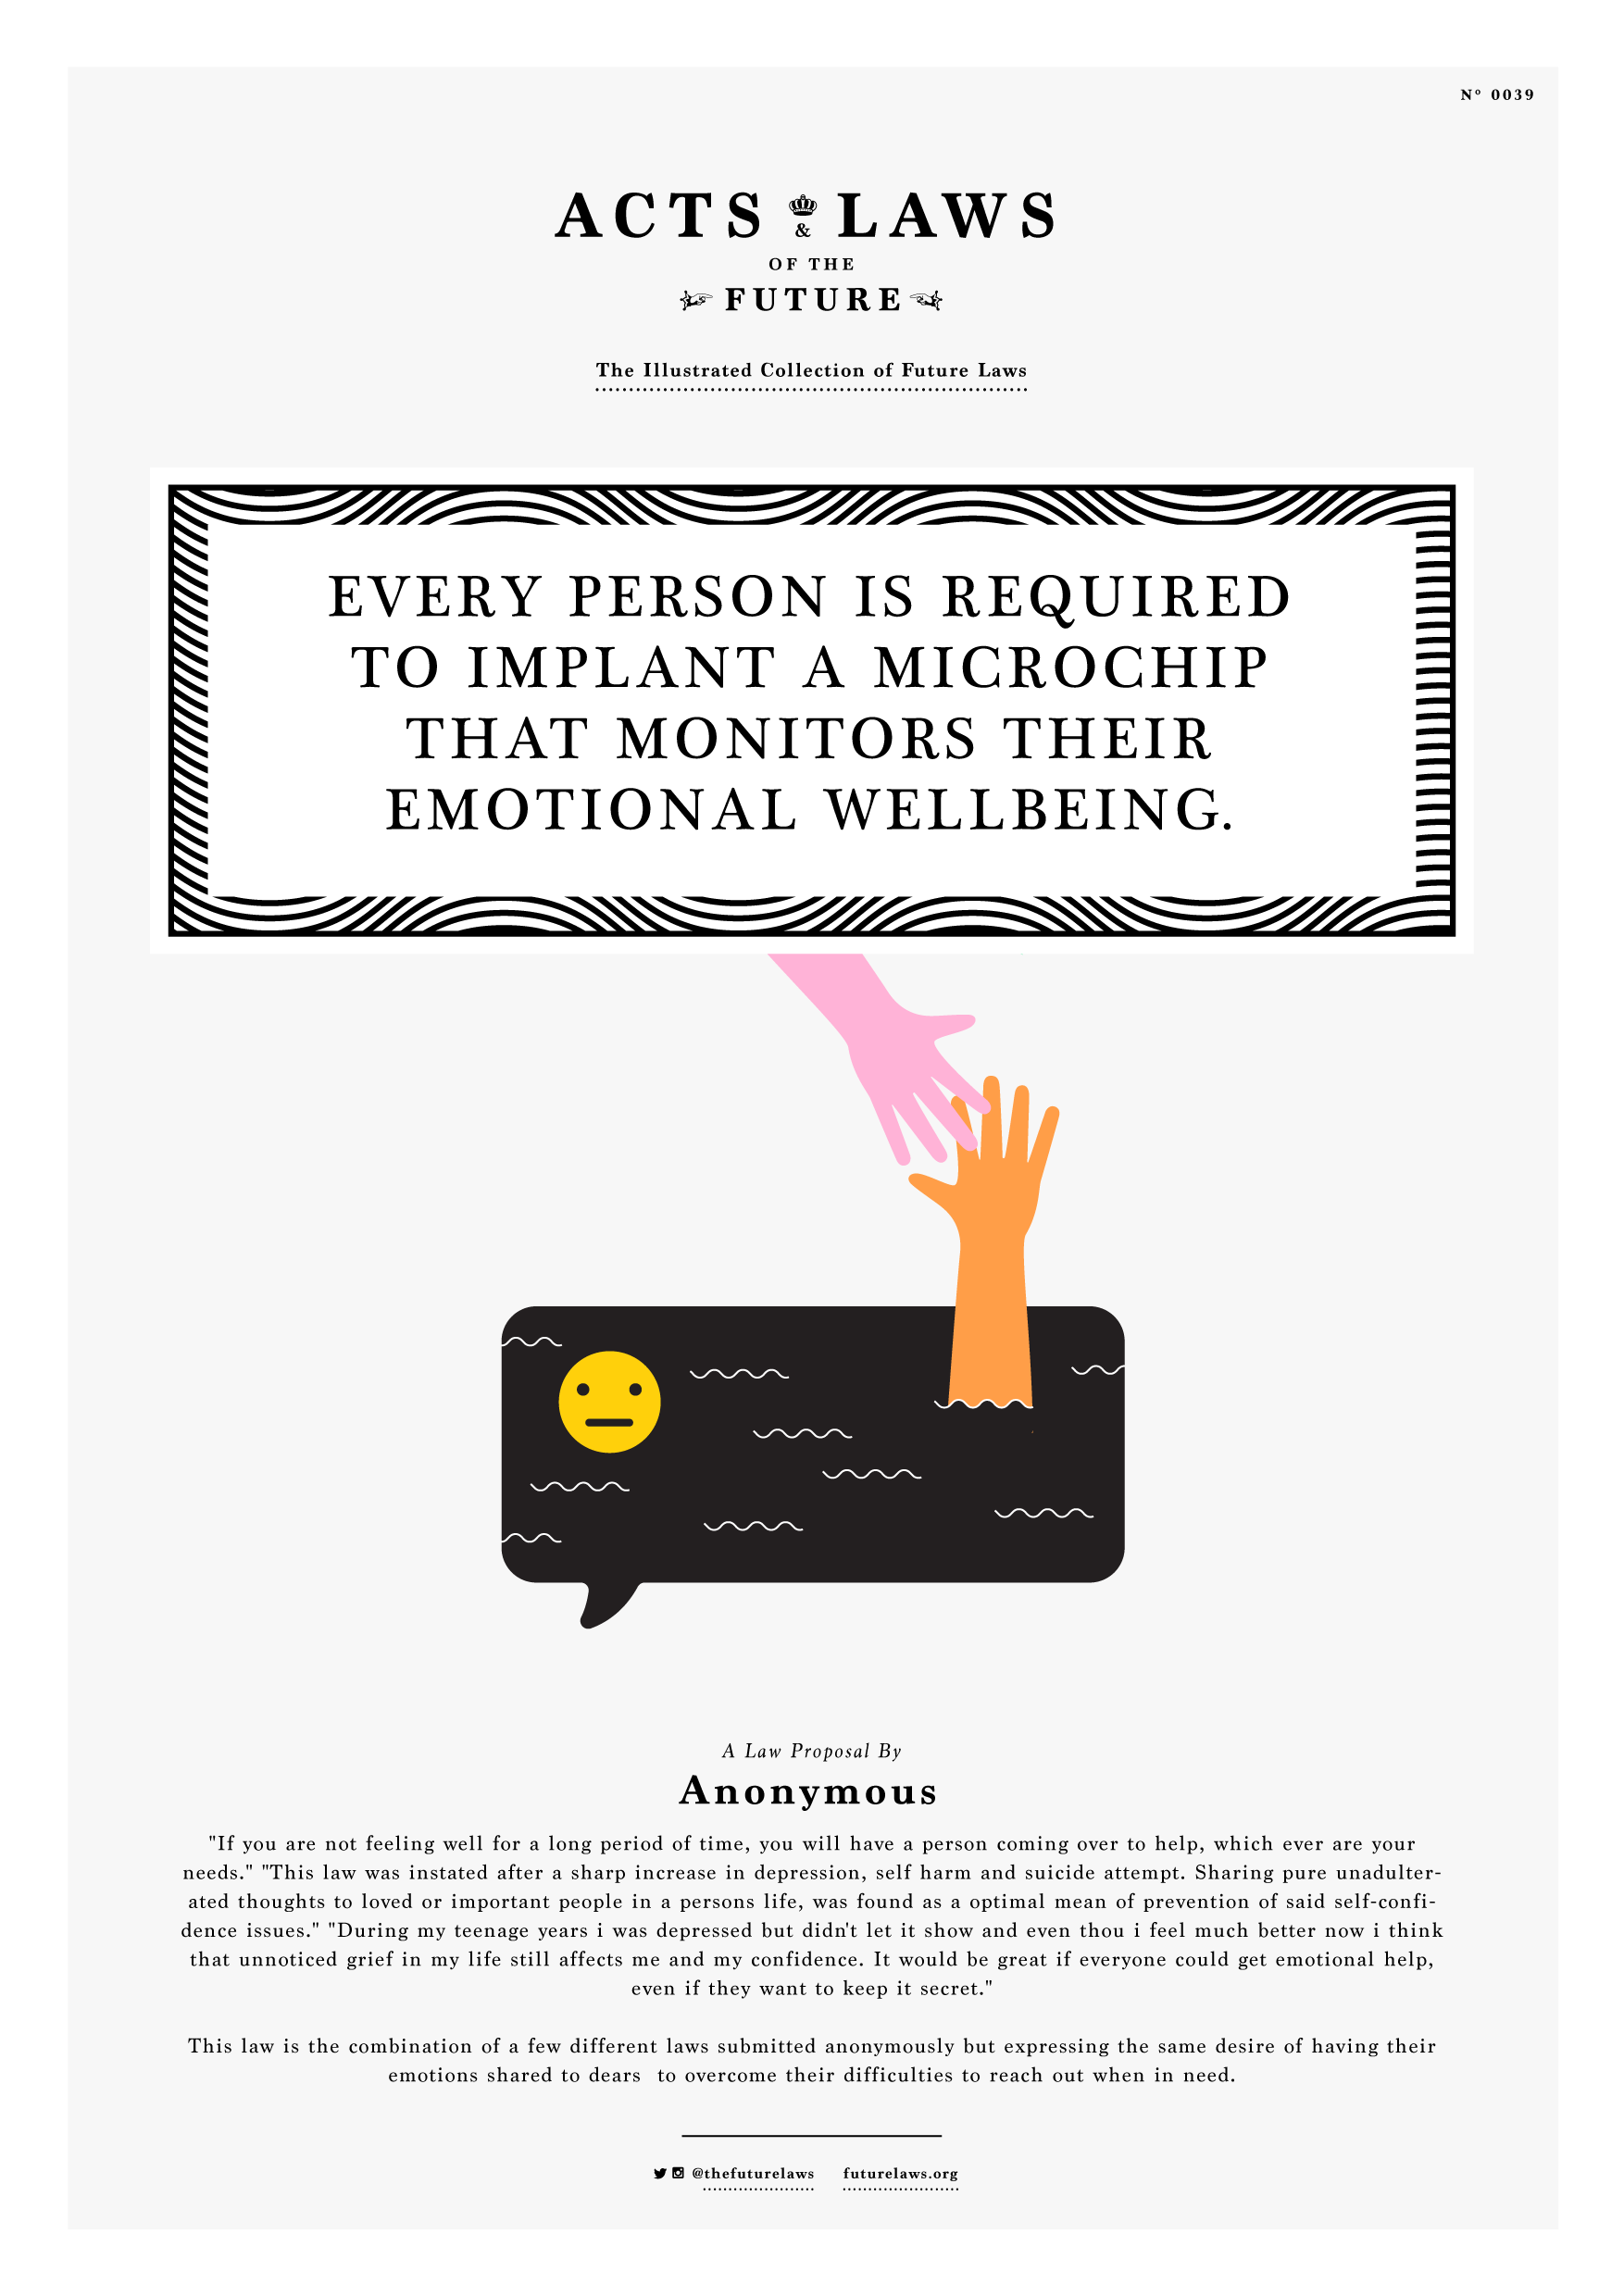 Every person is required to implant a microchip that monitors their emotional wellbeing.